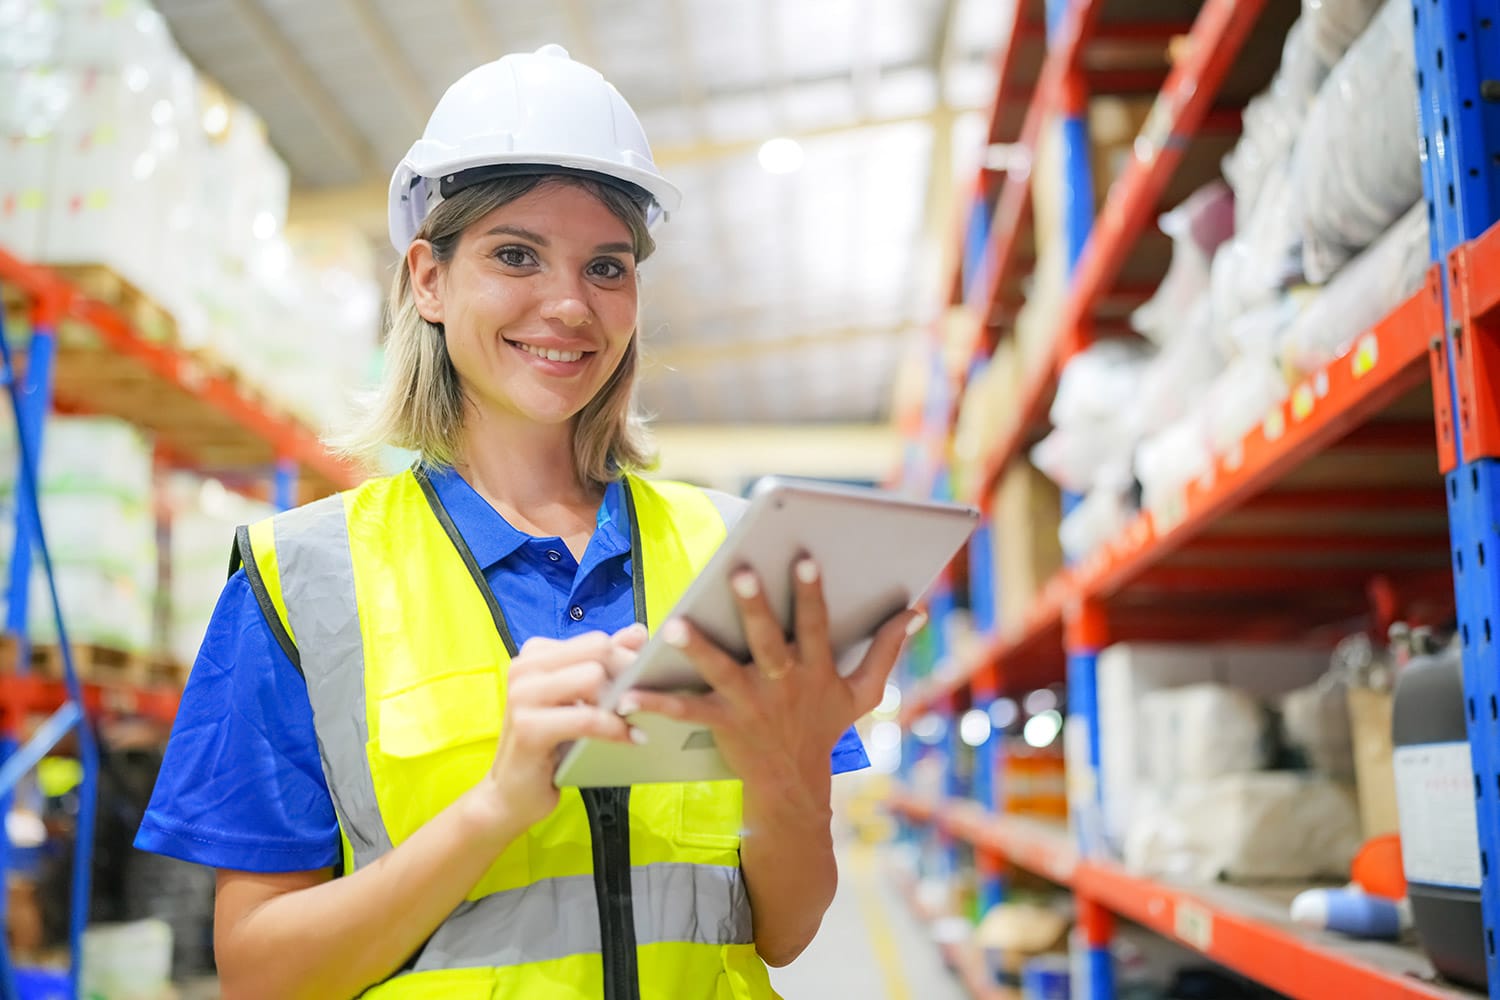 Woman with hard hat, vest, and ipad standing in warehouse isle with a smile.